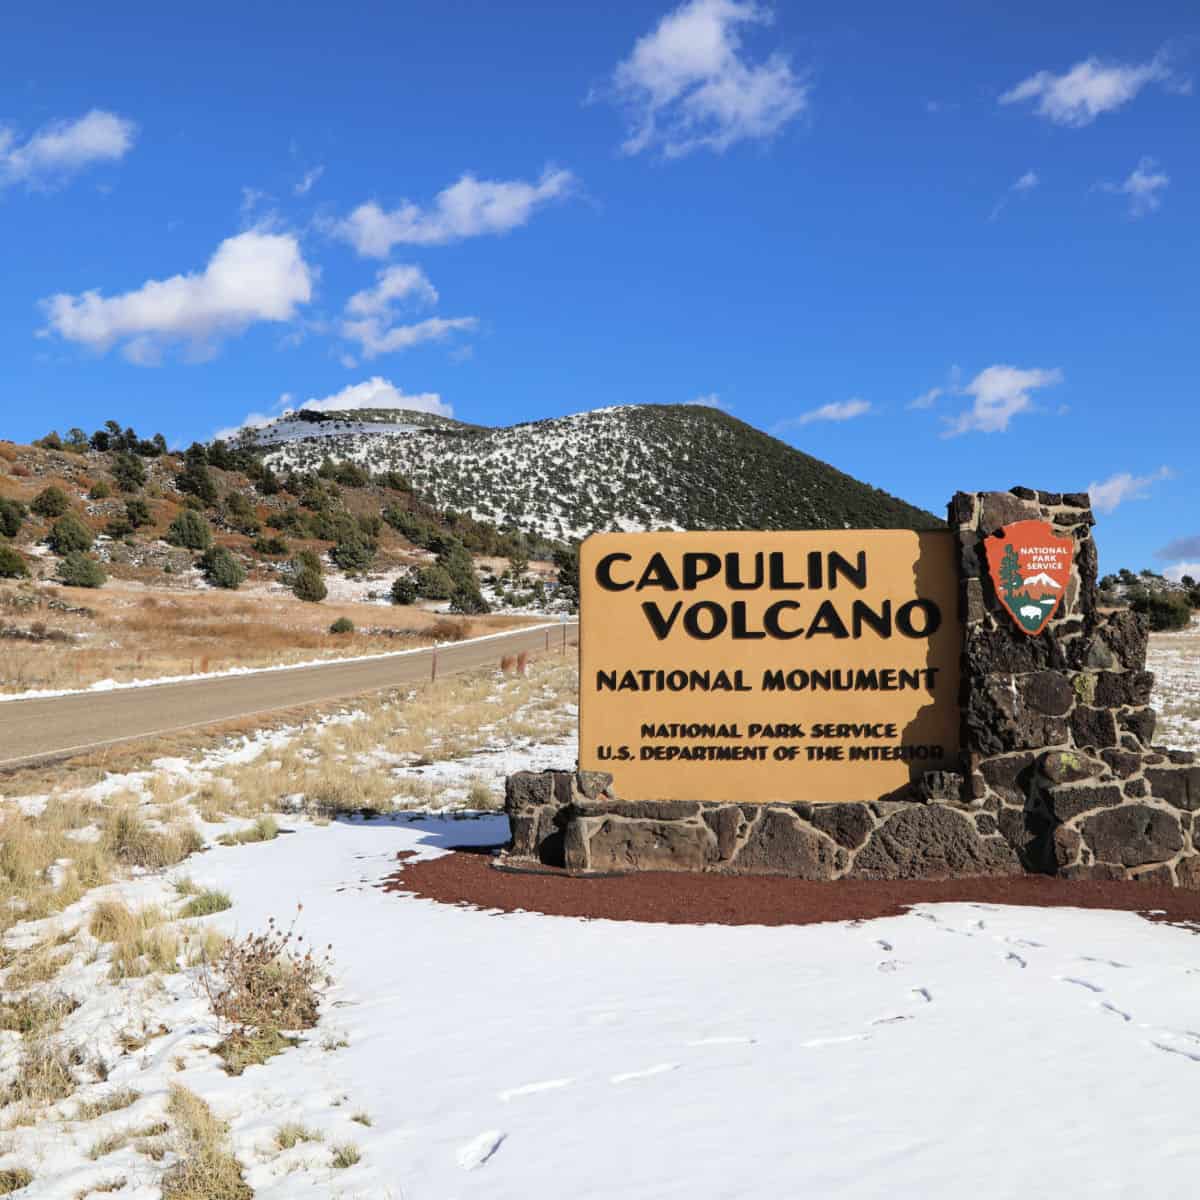 Entrance sign with Capulin Volcano in the background at Capulin Volcano National Monument